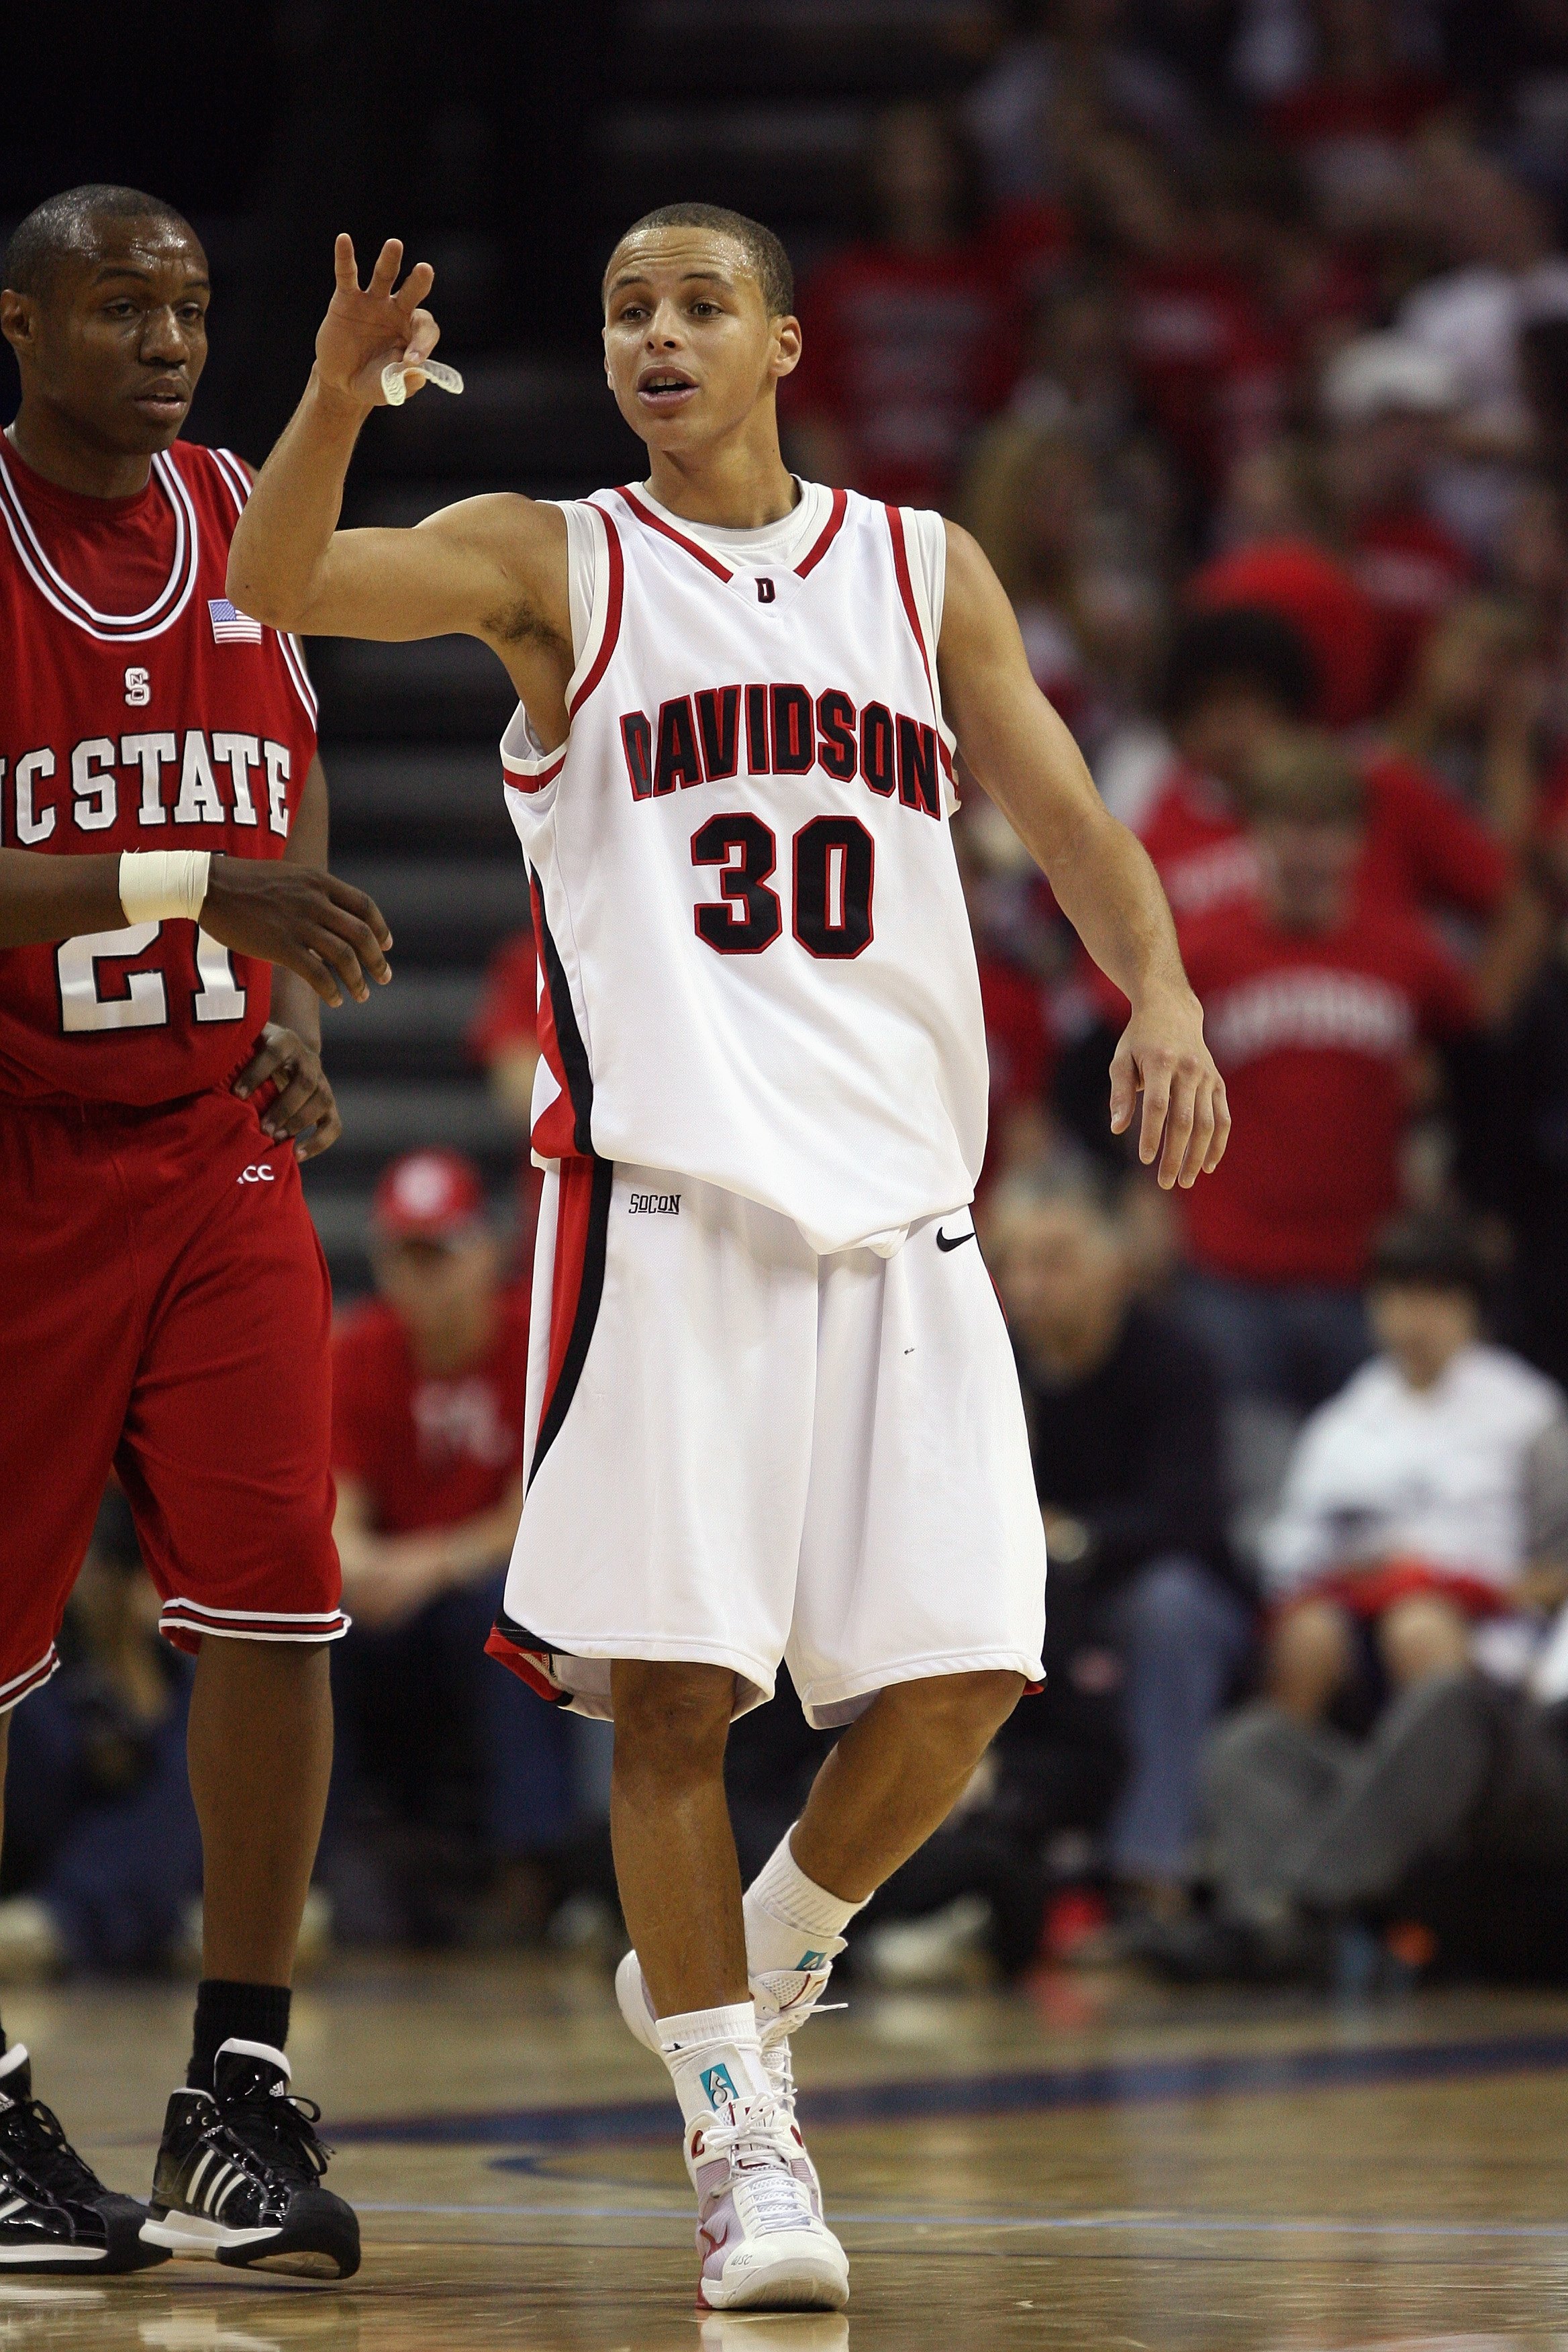 CHARLOTTE, NC - DECEMBER 6:  Stephen Curry #30 of the Davidson Wildcats walks upcourt during the game against the North Carolina State Wolfpack at Time Warner Cable Arena on December 6, 2008 in Charlotte, North Carolina. (Photo by Streeter Lecka/Getty Ima